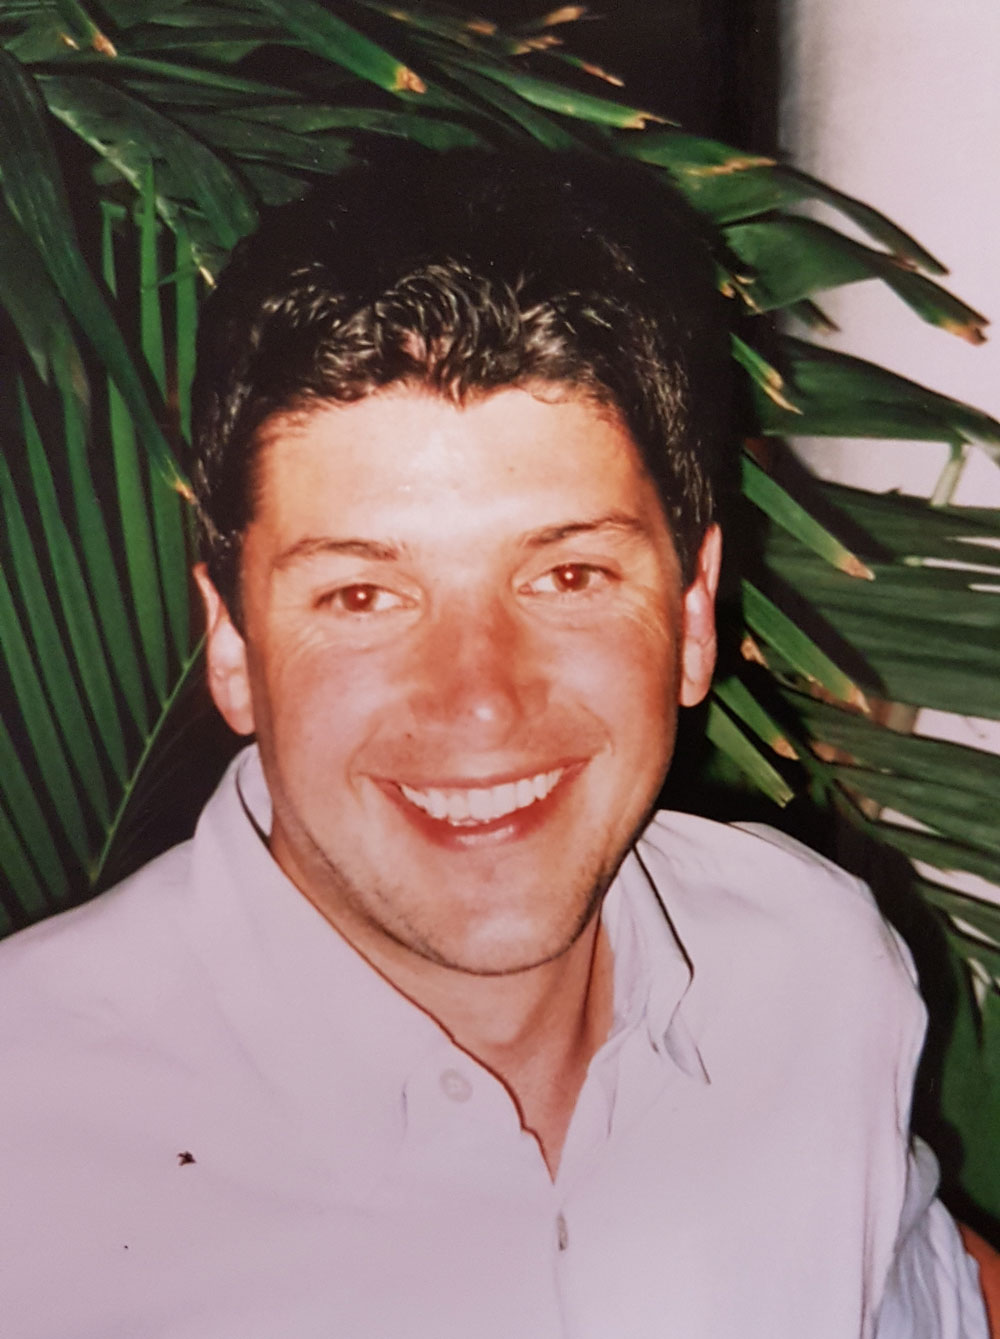 Darren Pacey was a fitness enthusiast, successful Marketing professional